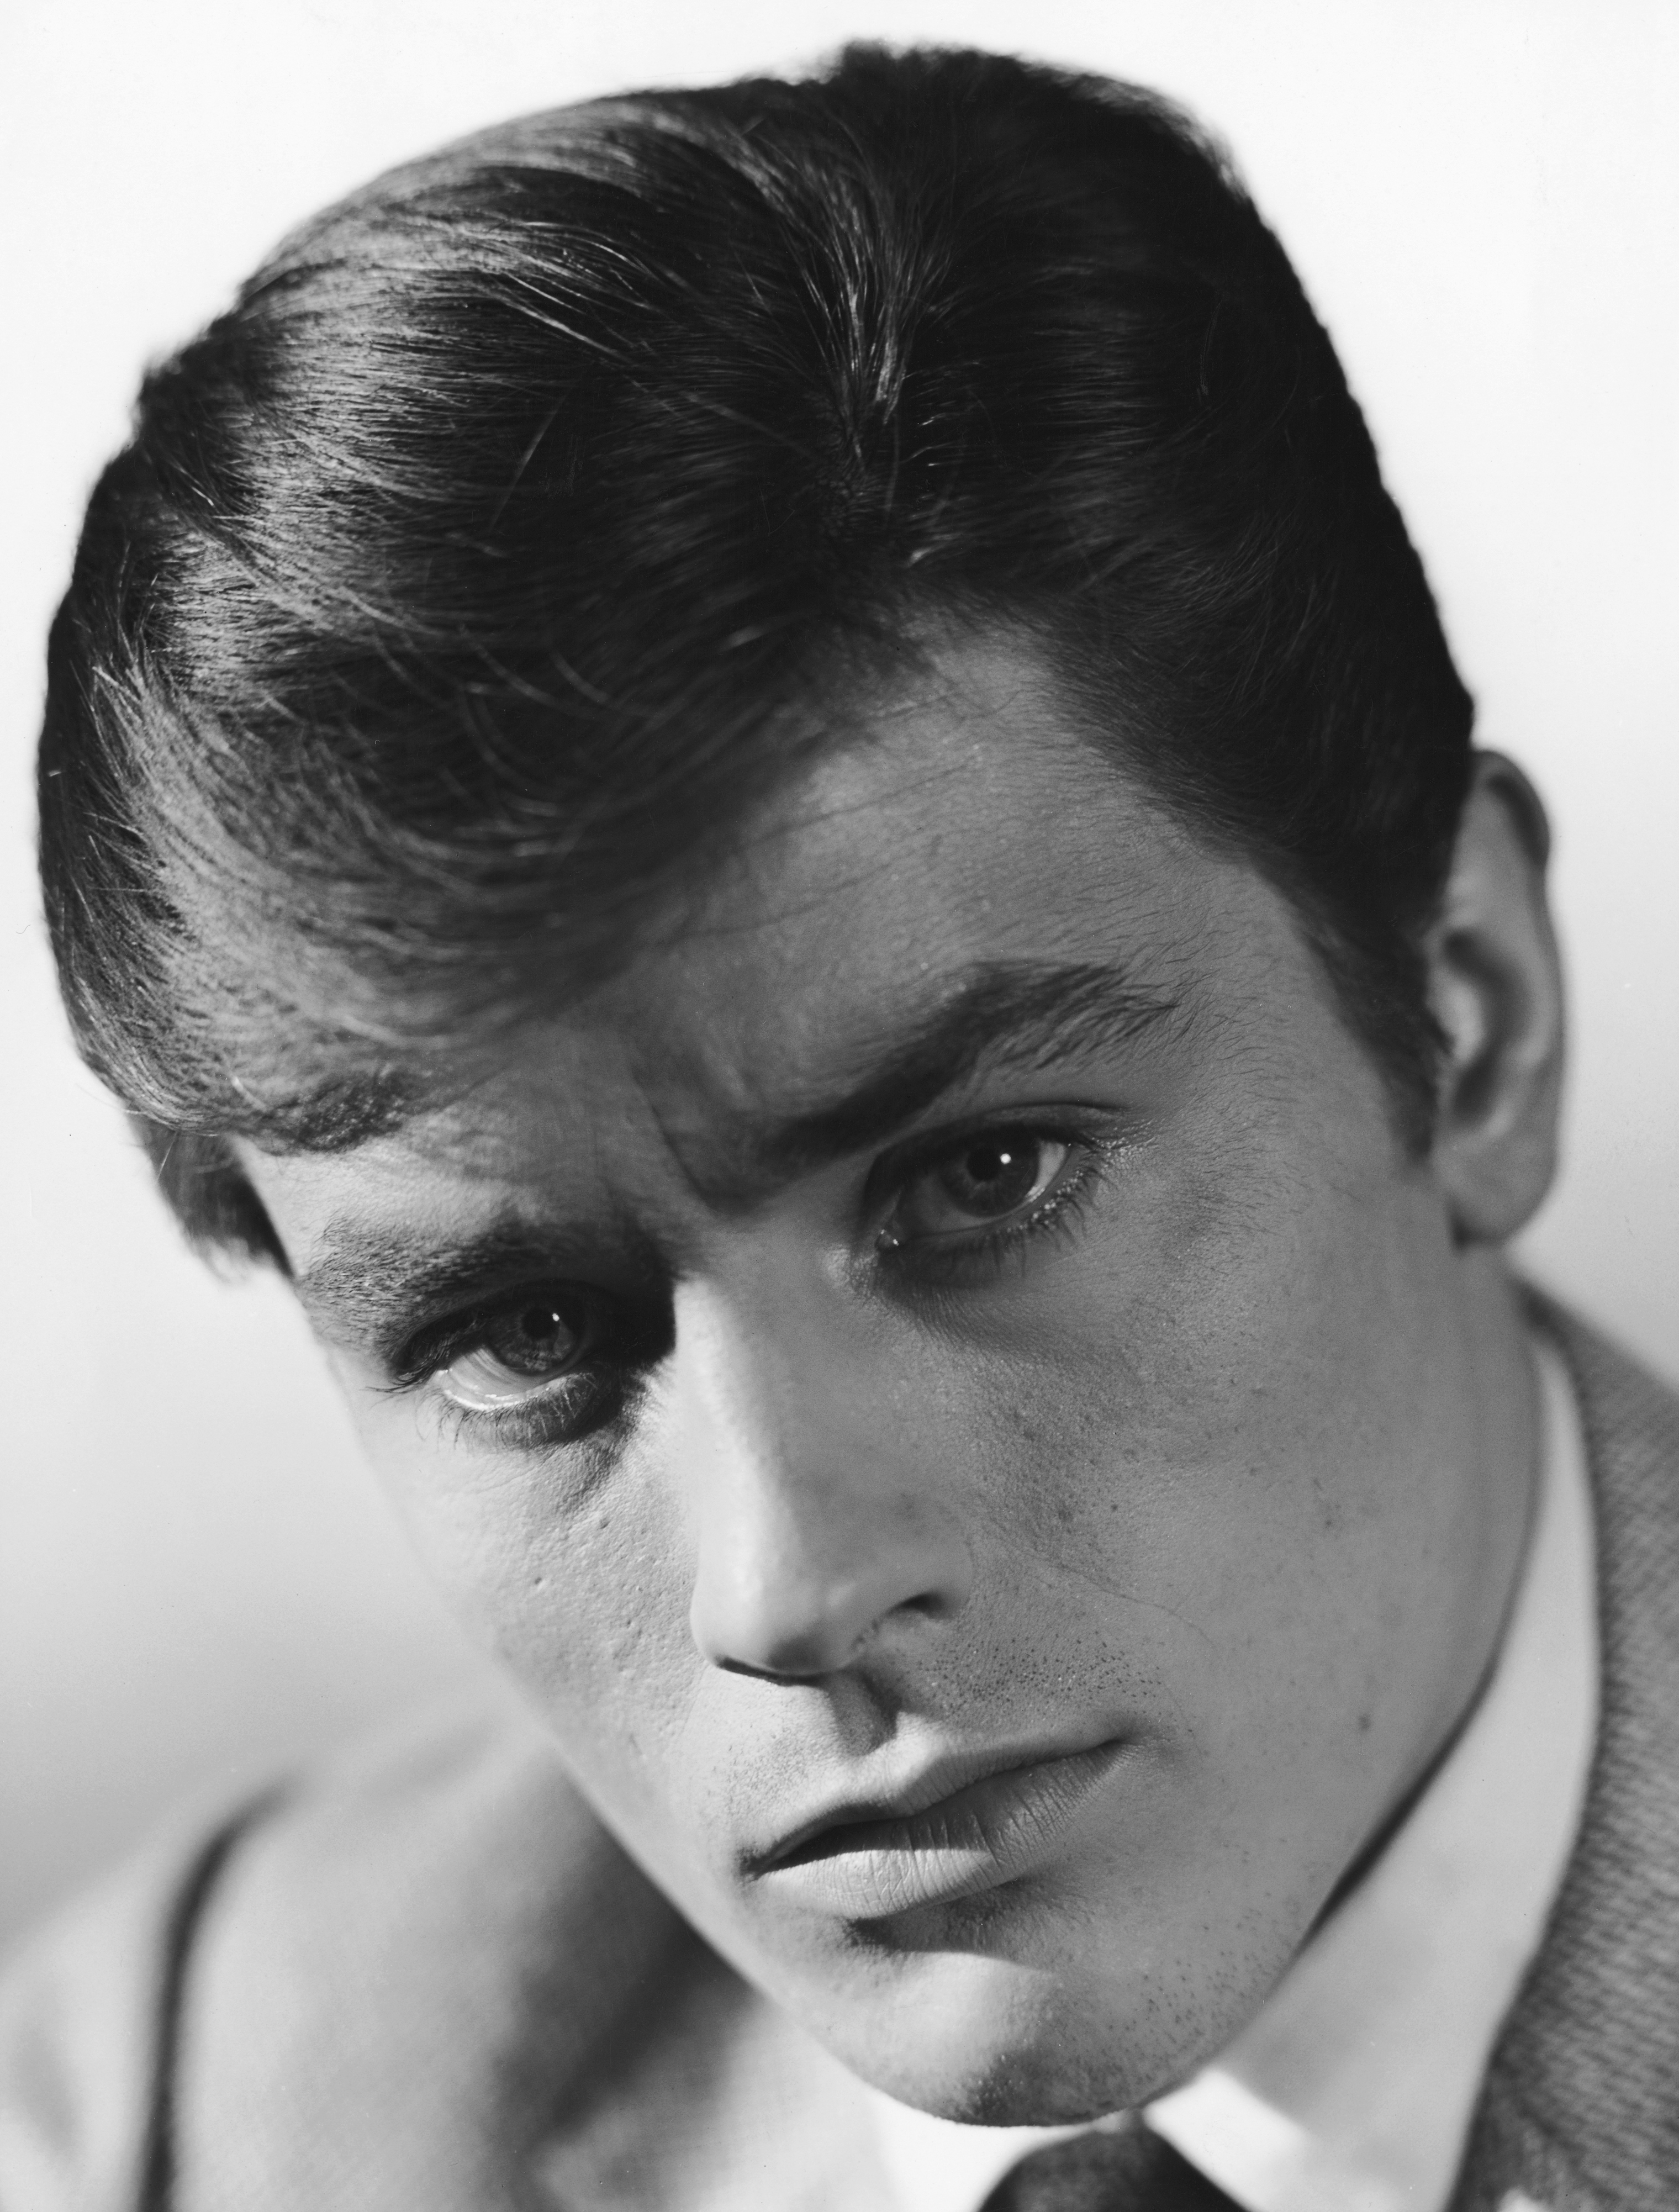 French actor Alain Delon on January 01, 1955 | Source: Getty Images